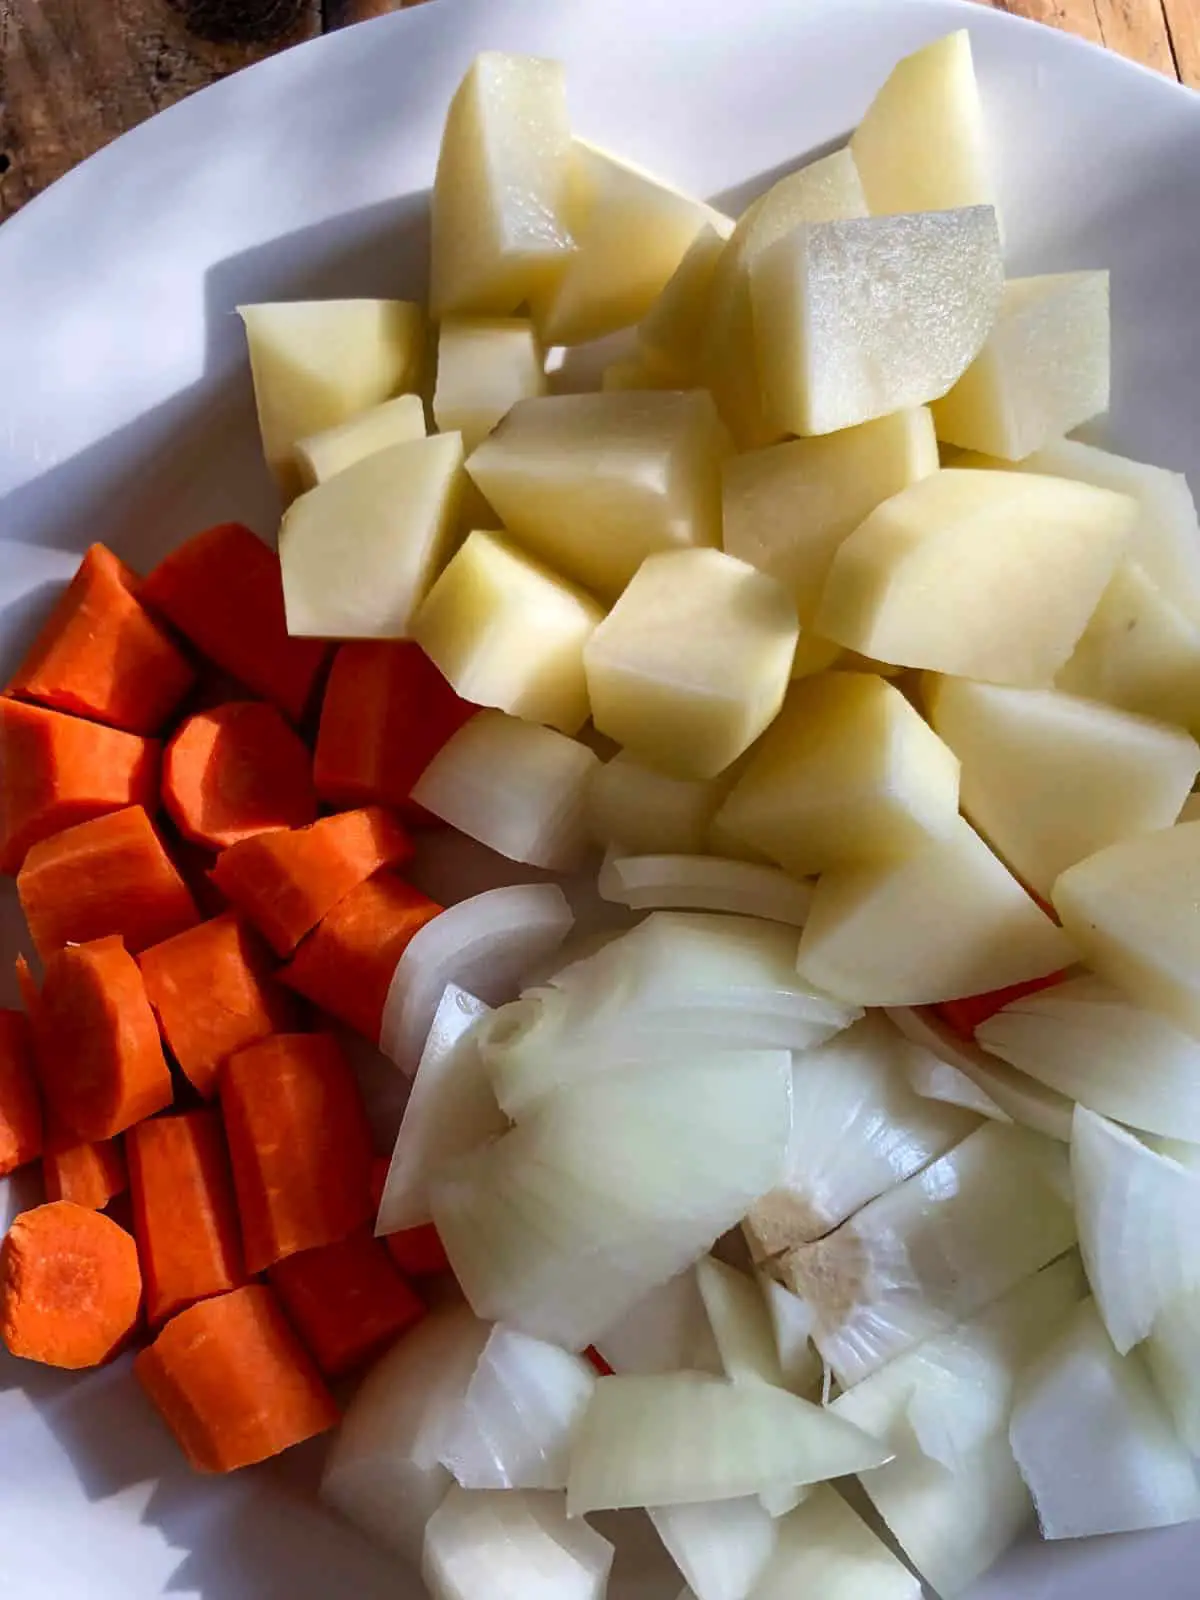 Cut up carrots, cut up potatoes, and cut up onions on a white plate.